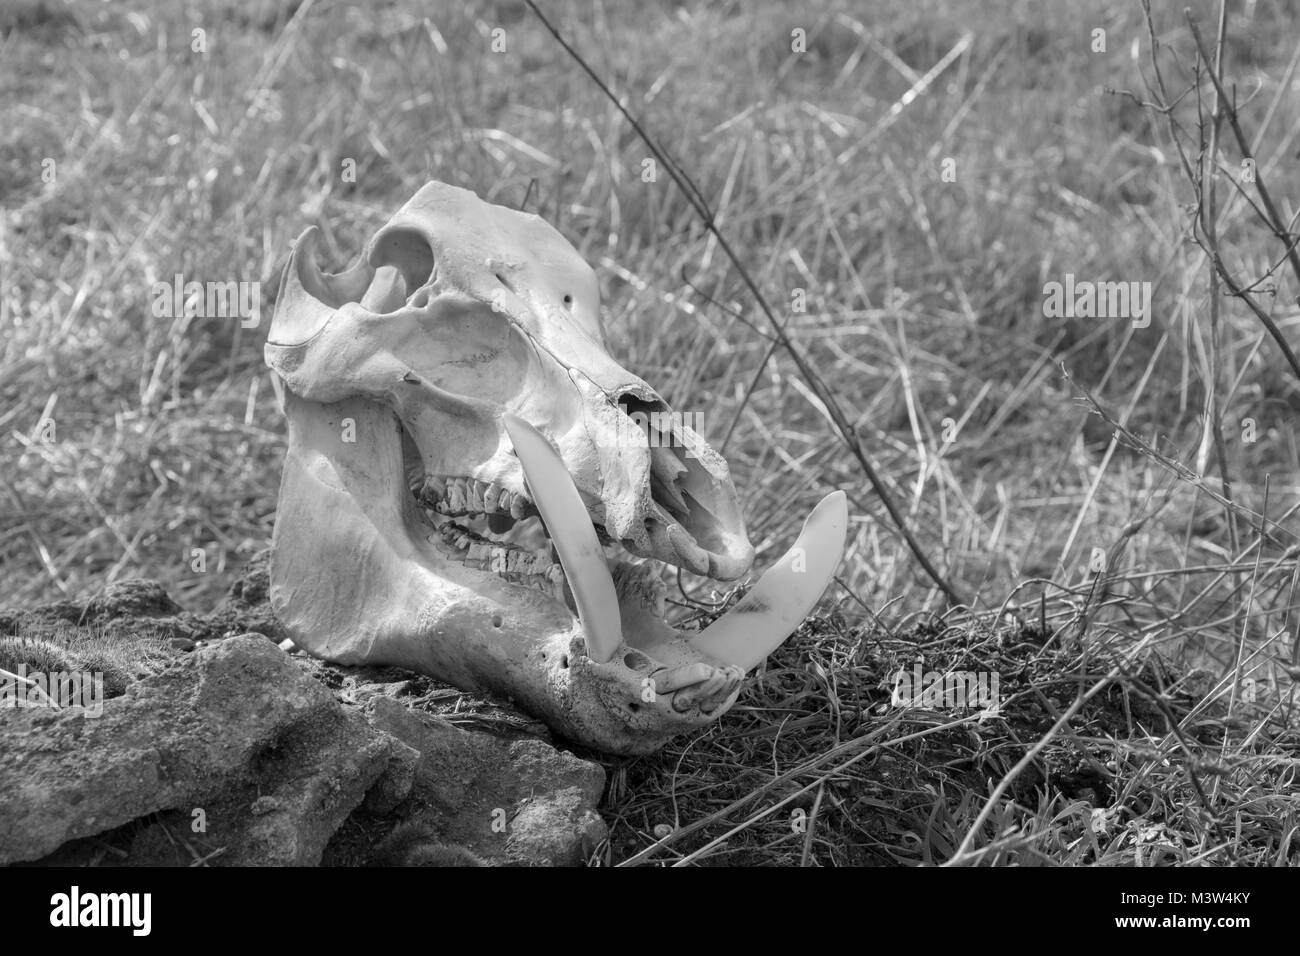 Skull of a wild boar on a dry grass background, black and white photo Stock Photo